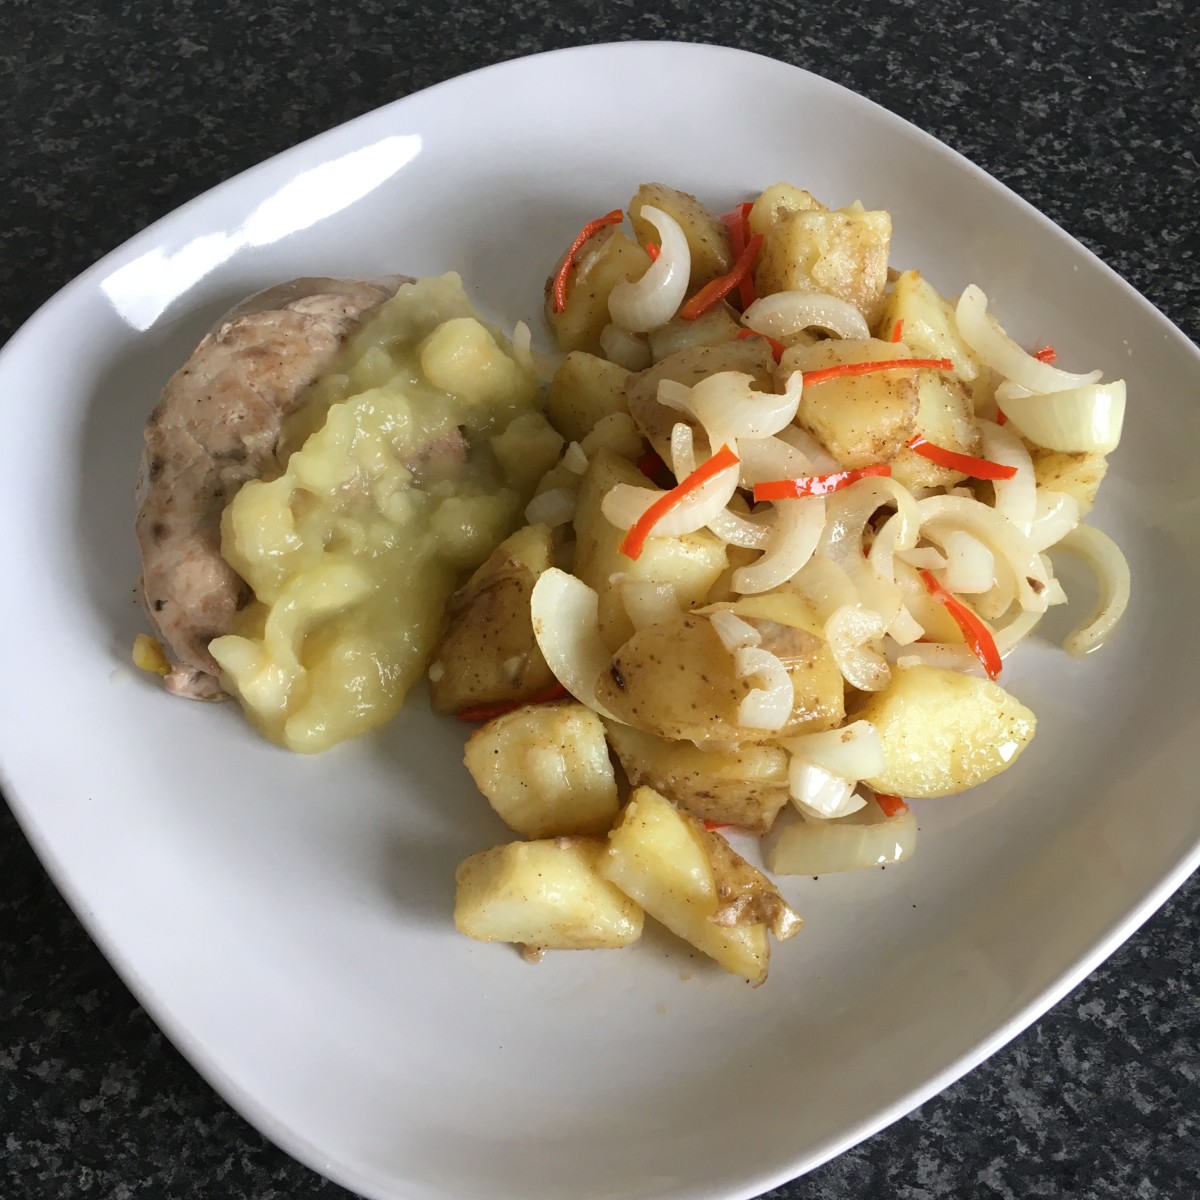 Pan fried pheasant breast with homemade apple sauce and spicy stir fried potato and onion